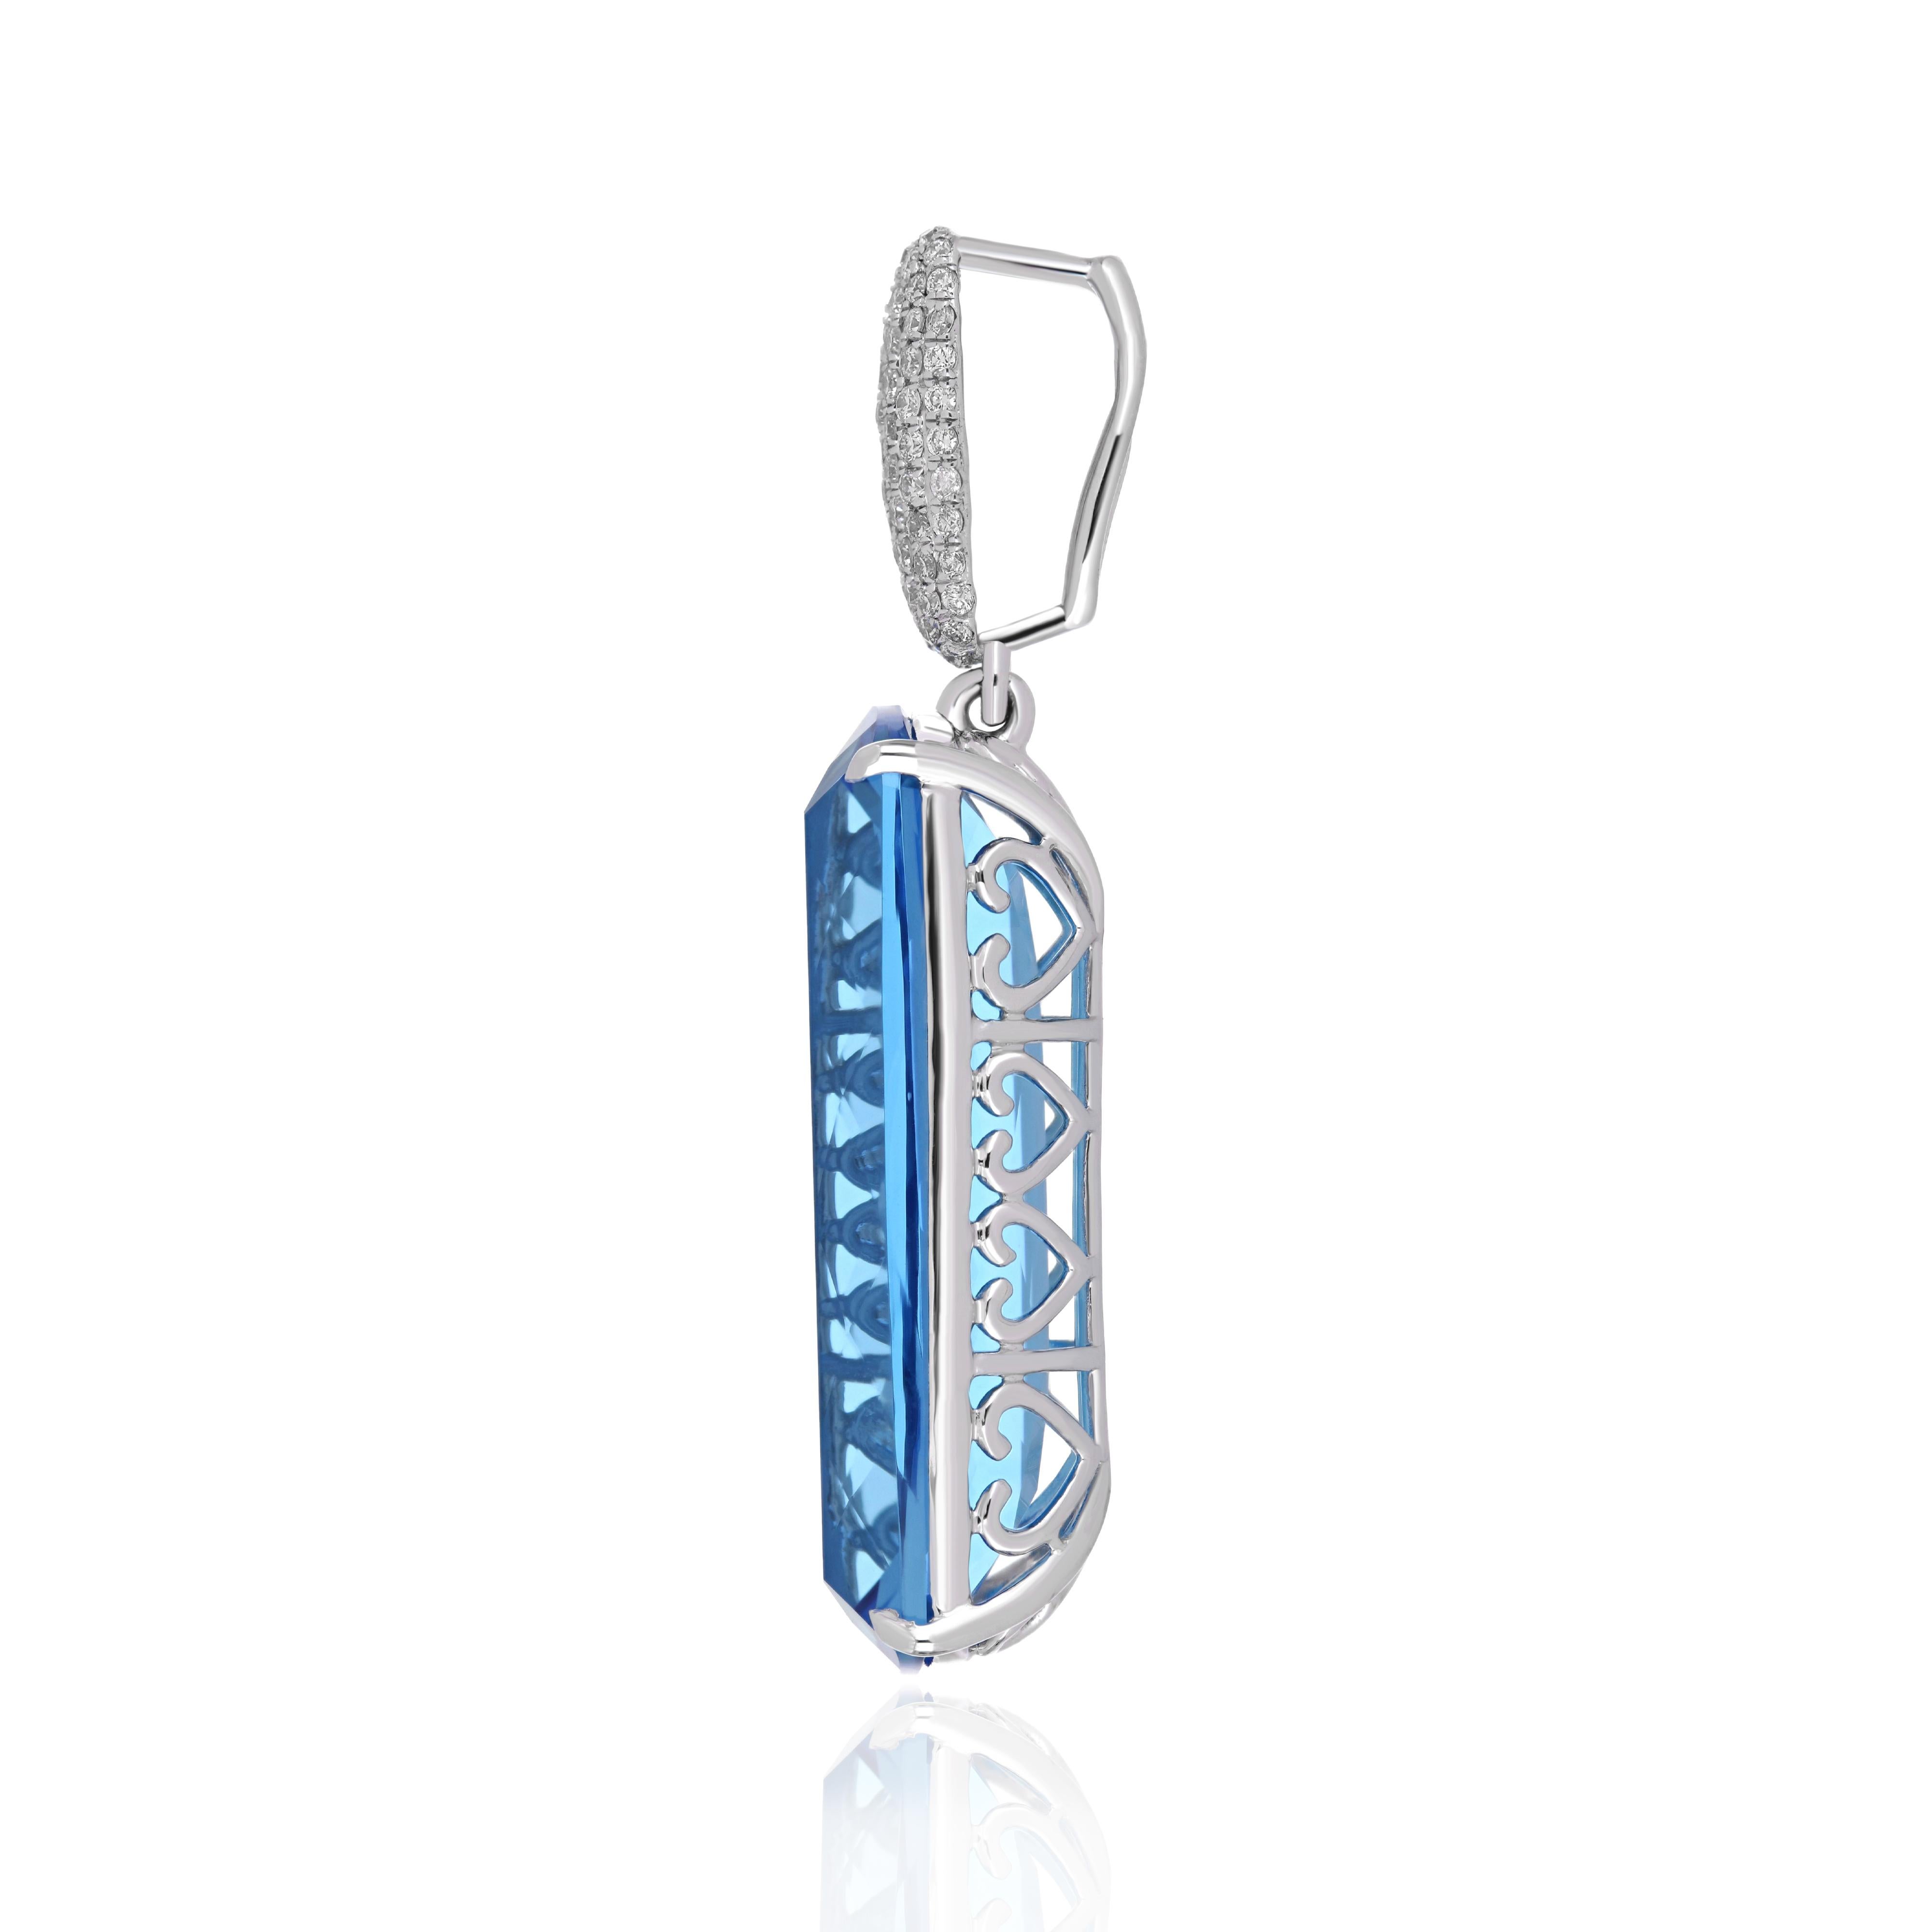 Elegant and exquisitely detailed 14 Karat White Gold Pendant center set with 19.55 CT's Cushion Shape Swiss Blue Topaz, beautifully accented with micro pave set Diamonds, weighing approx. 0.33 CT's Beautifully Hand crafted in 14 Karat White